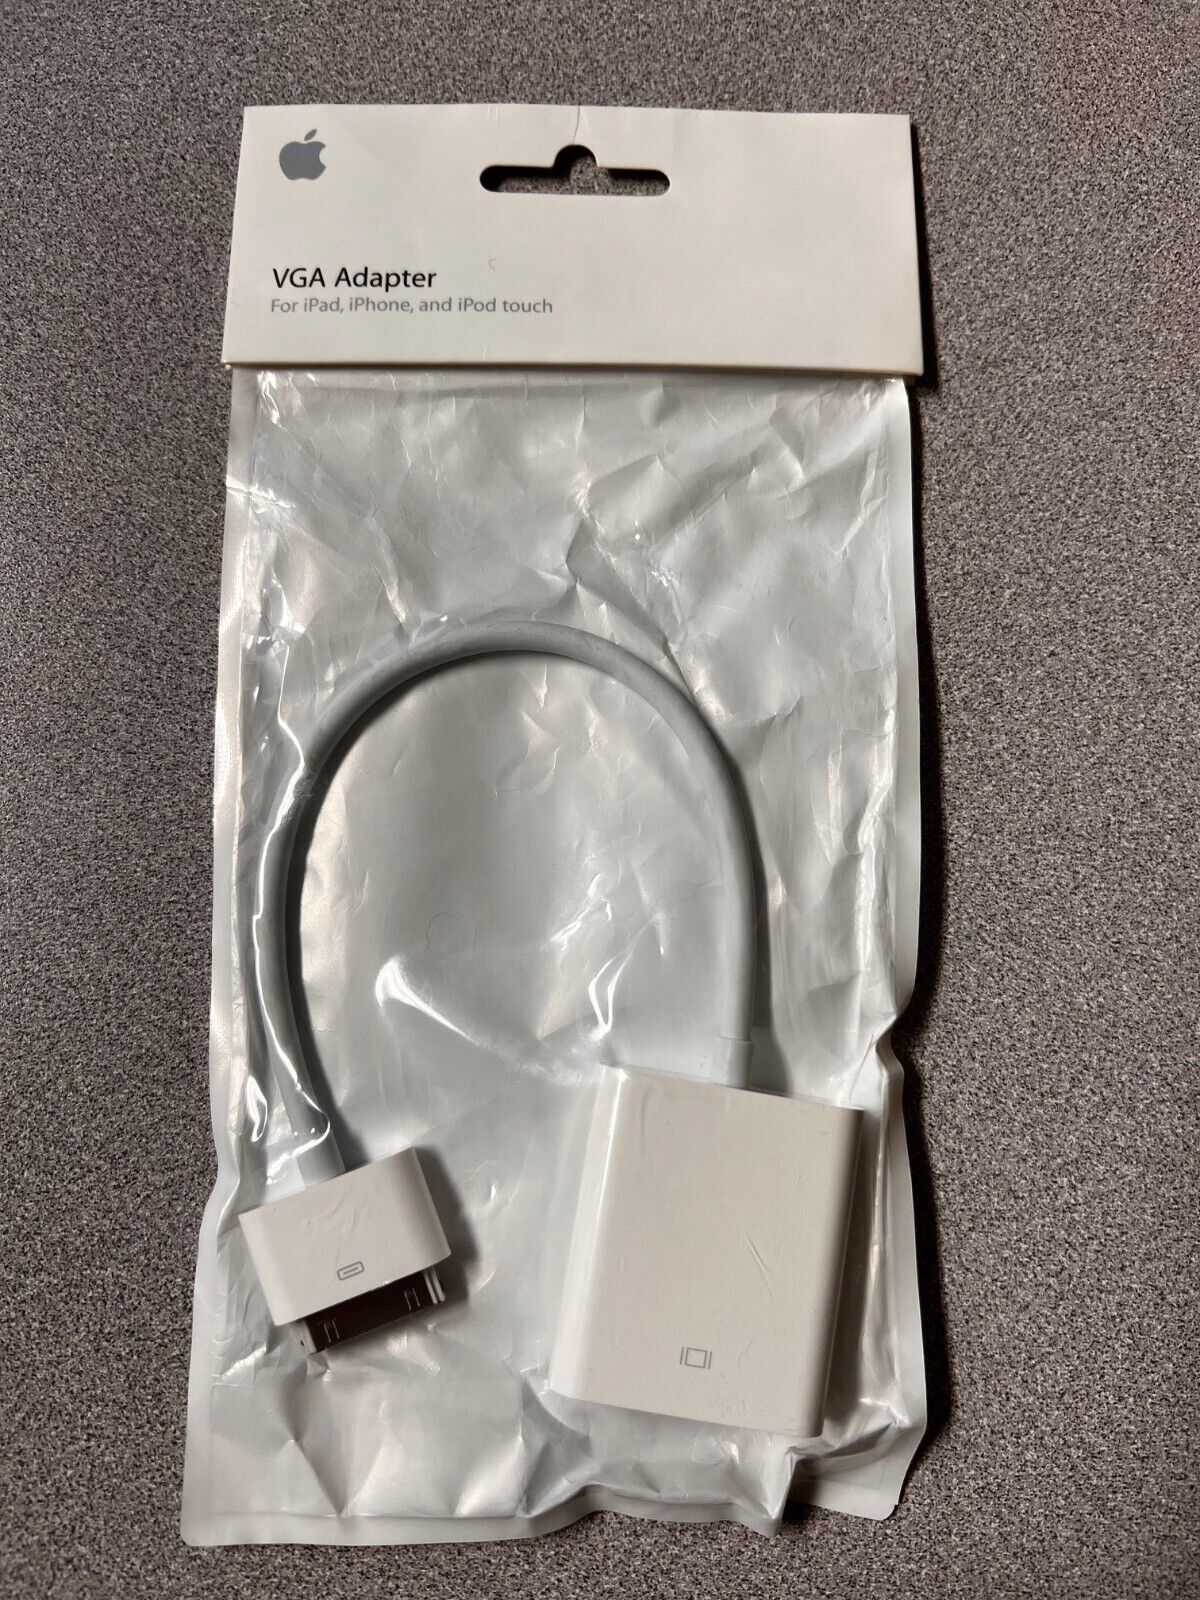 Genuine Apple VGA Adapter for iPad, iPhone and iPod Touch (30-pin to VGA)